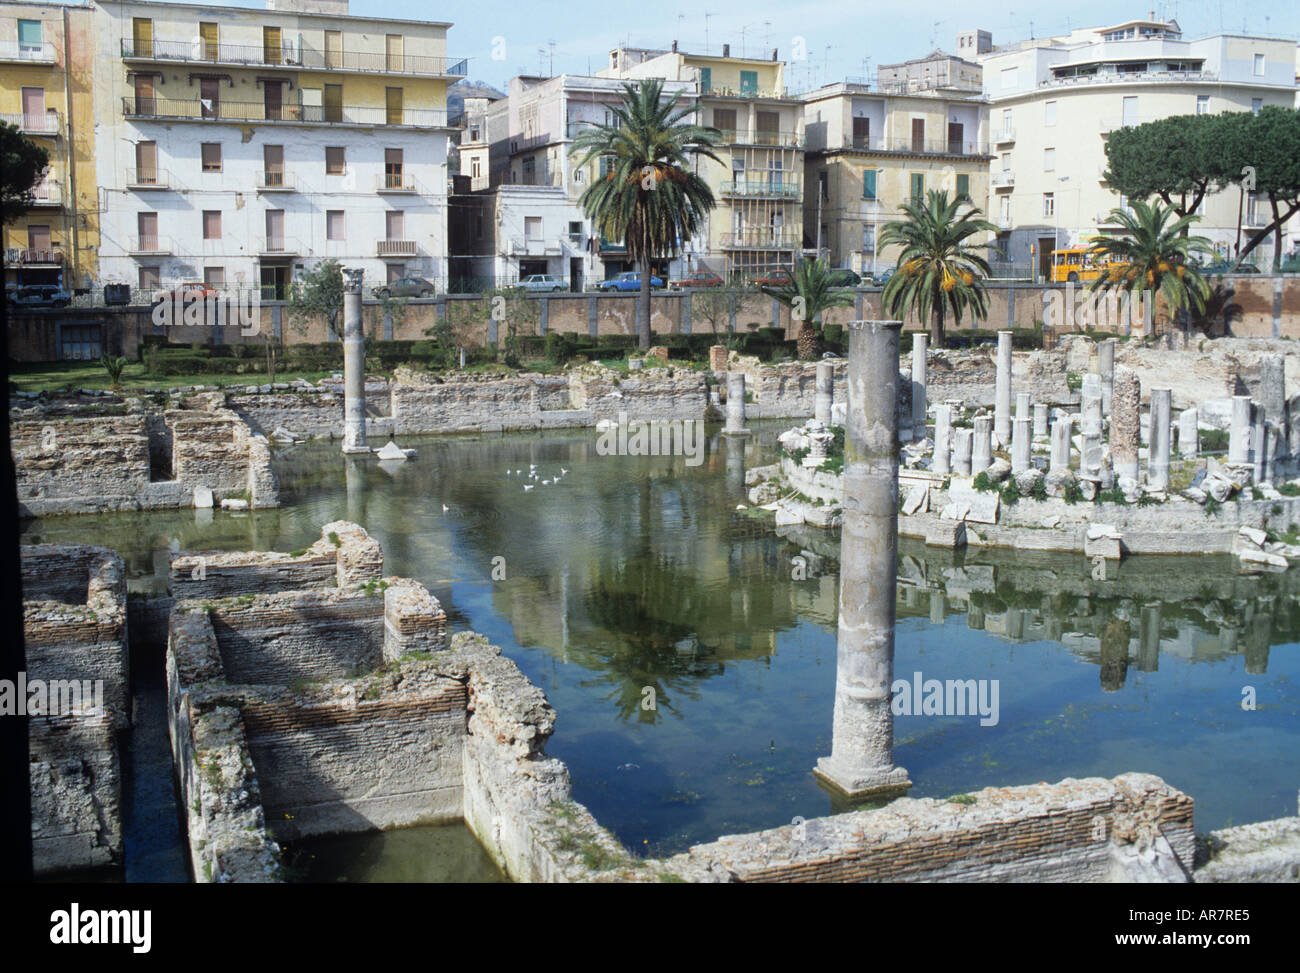 Italy, Pozzuoli, The Temple of Serapis is named after a statue of the God was discovered here.It was actually the macellum. Stock Photo